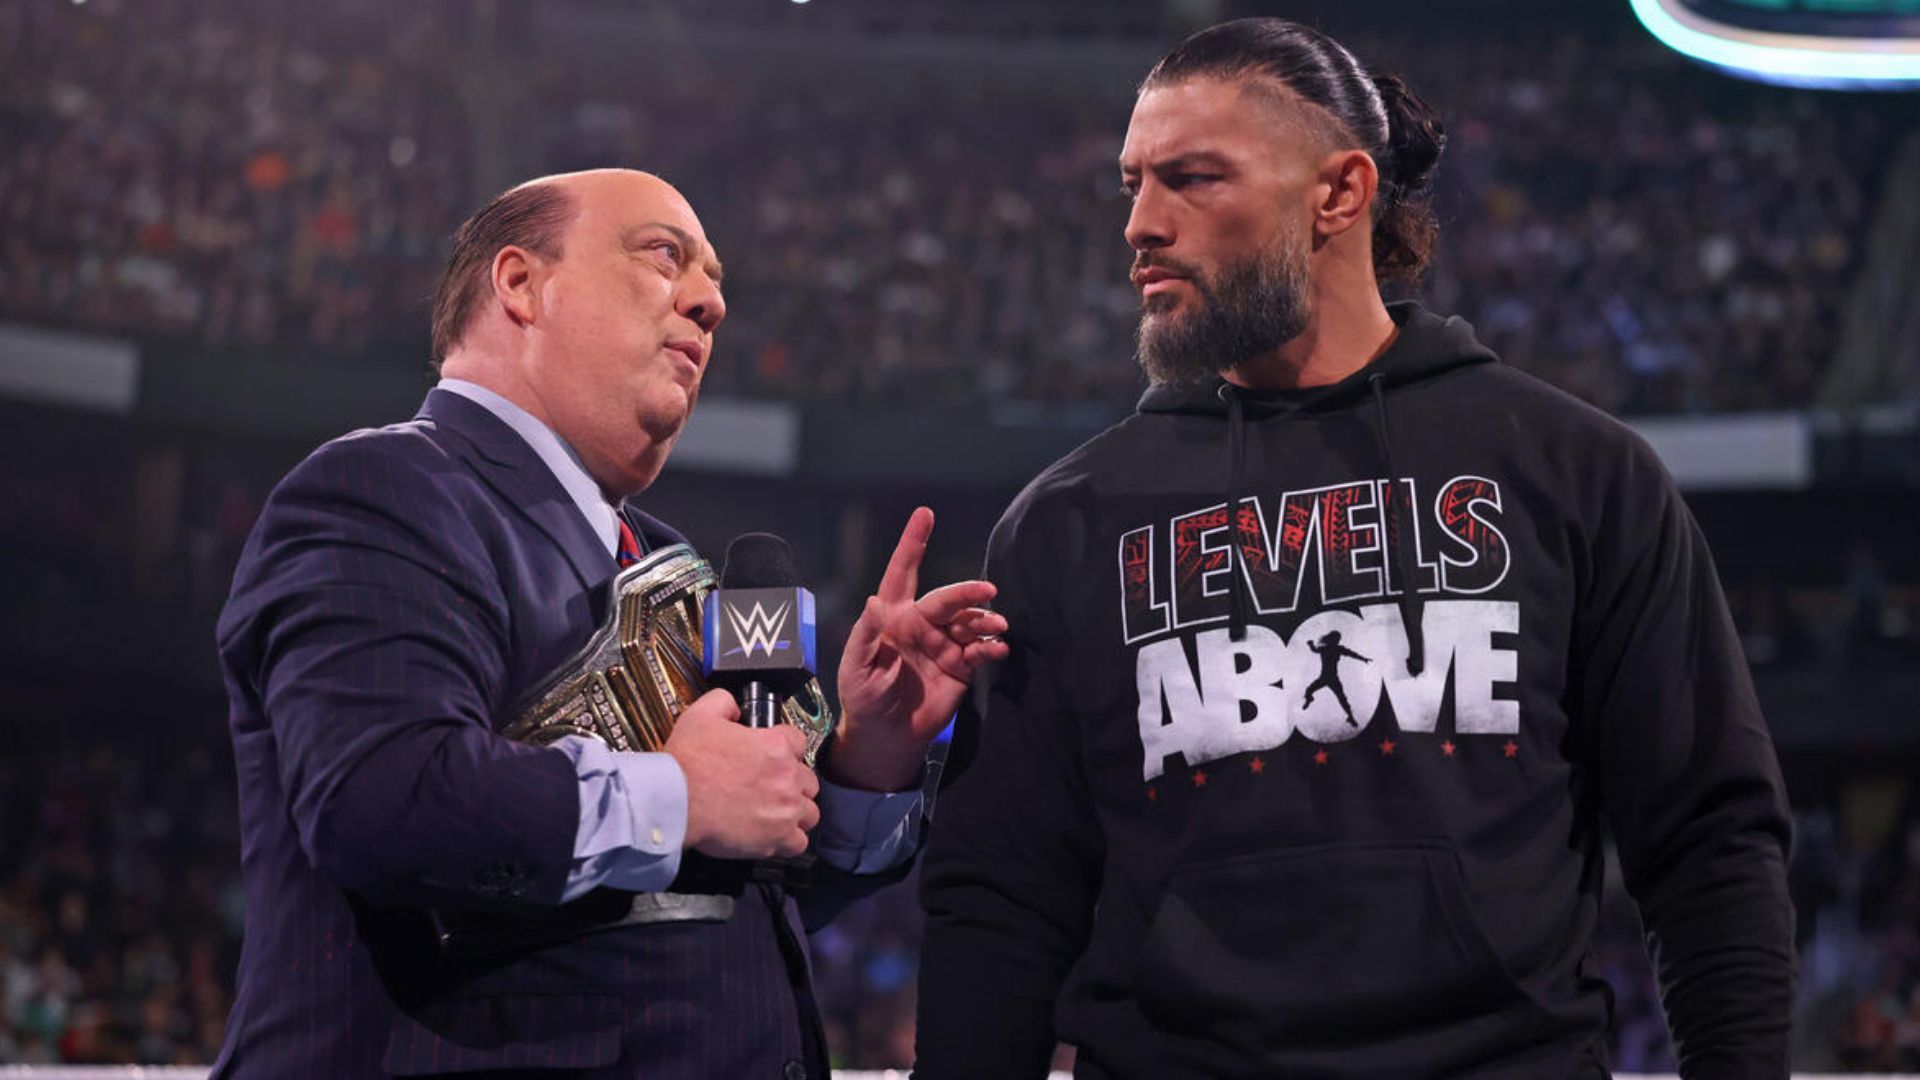 Roman Reigns and Paul Heyman began working together in 2020